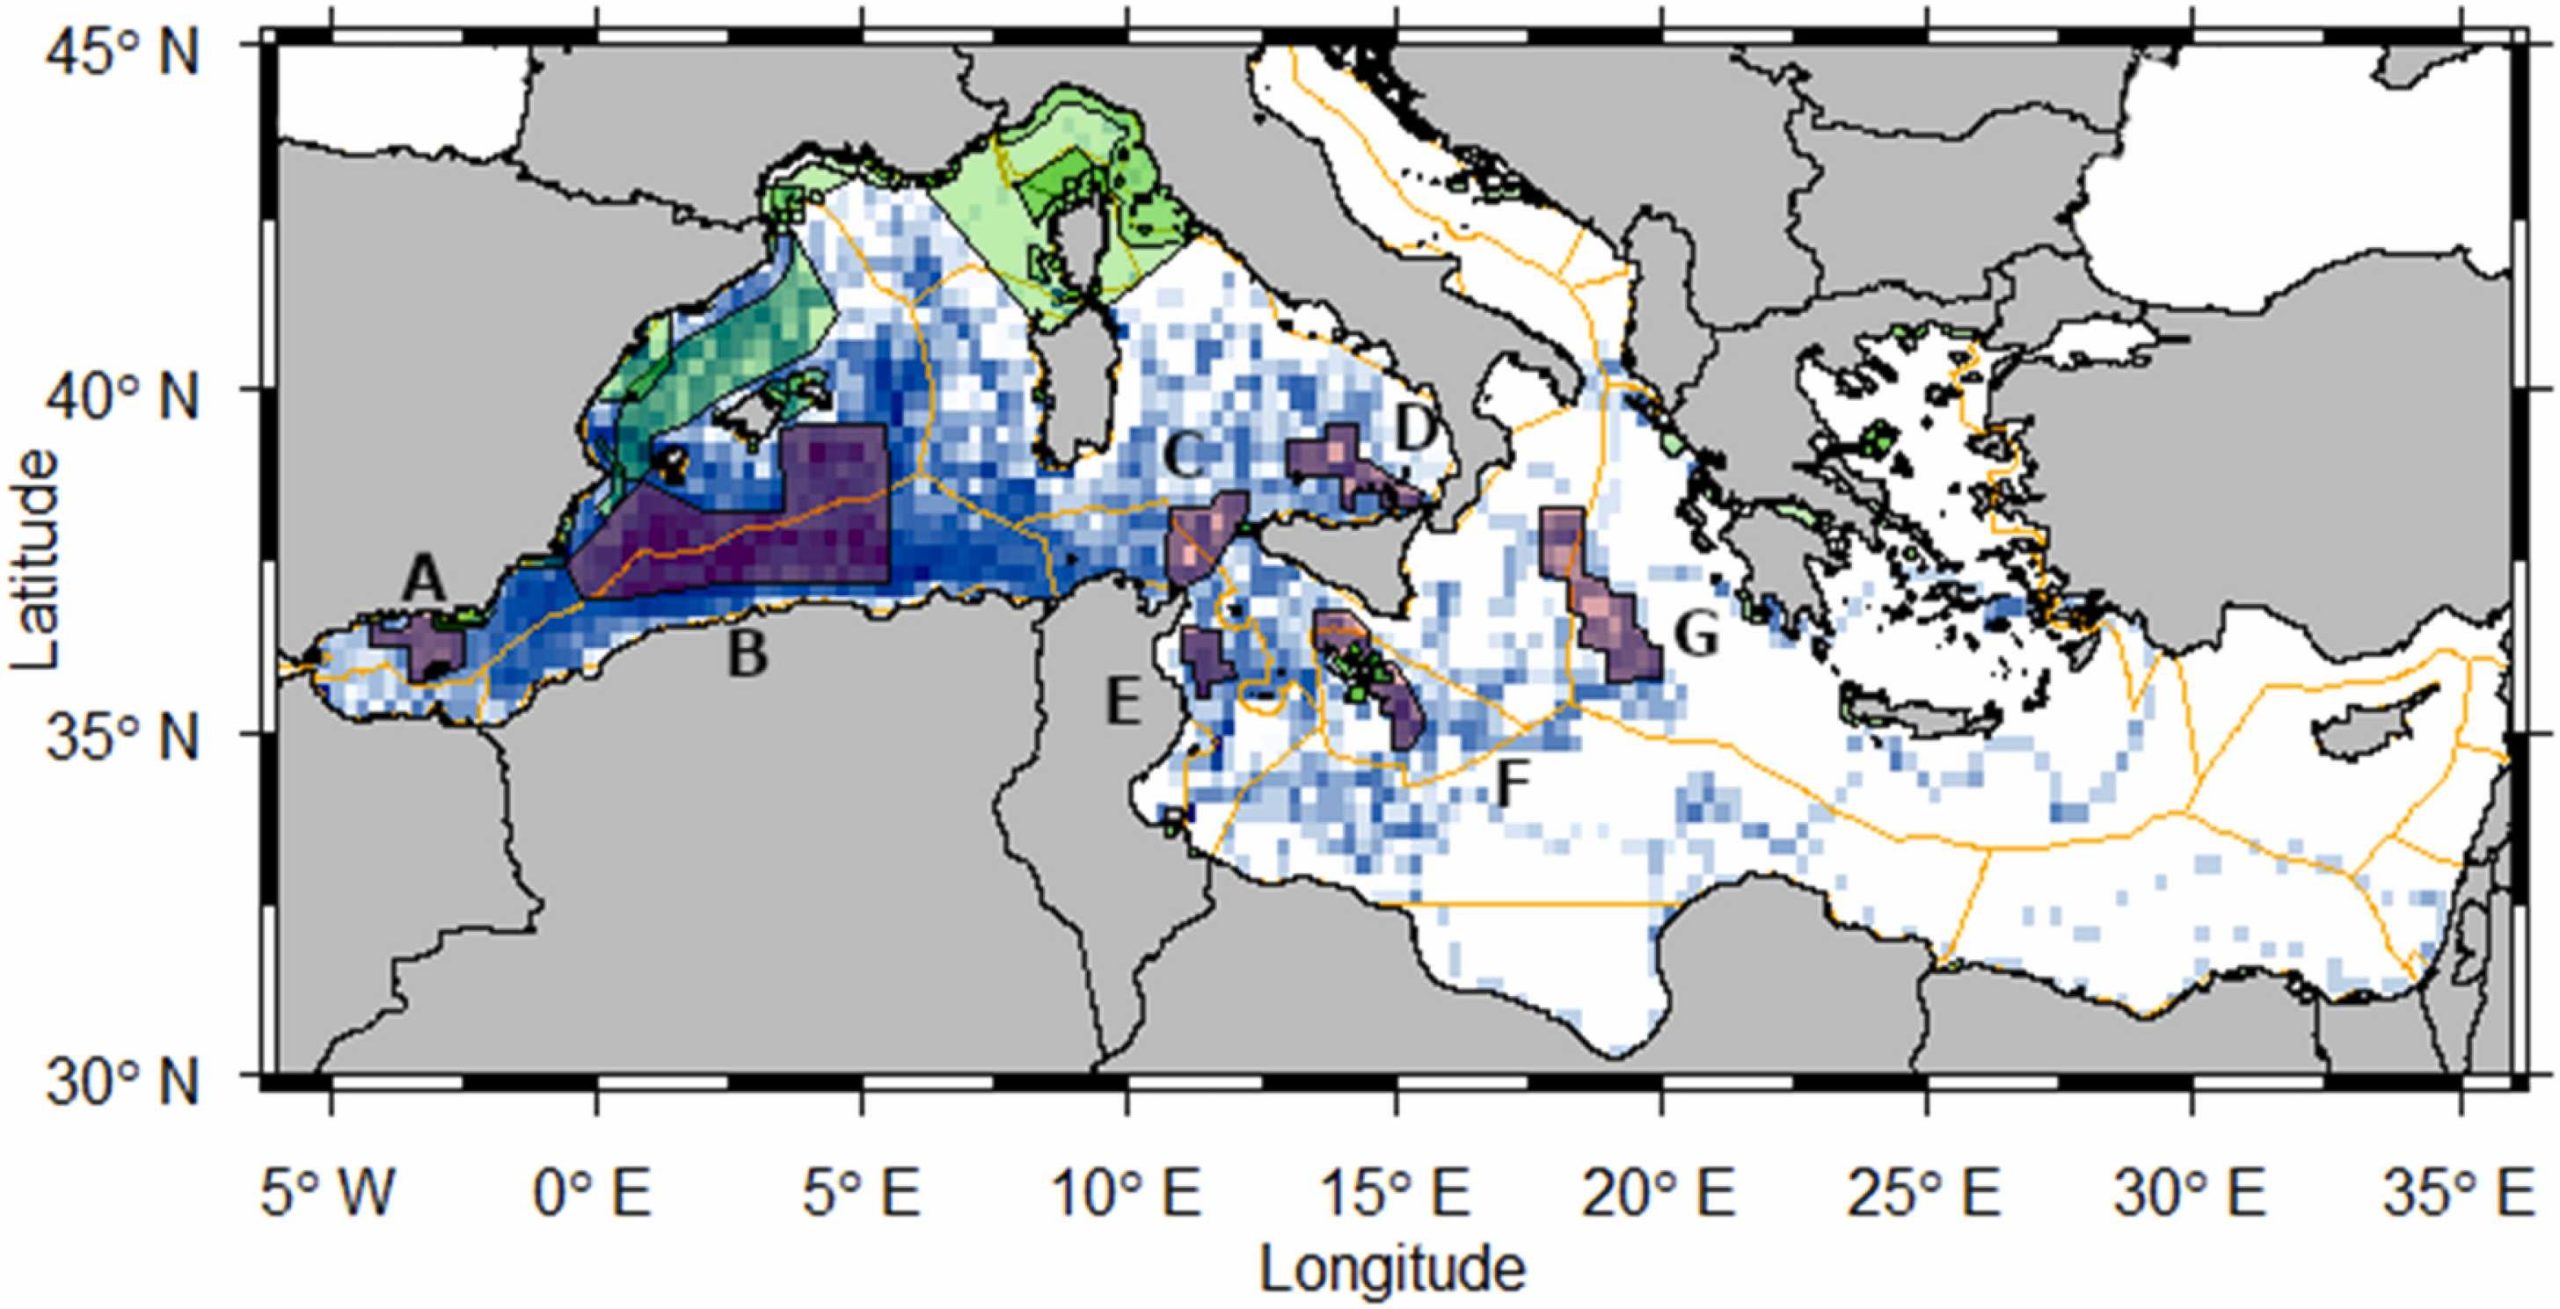 Protected Areas proposed by this study for loggerhead sea turtle conservation in the Mediterranean Sea